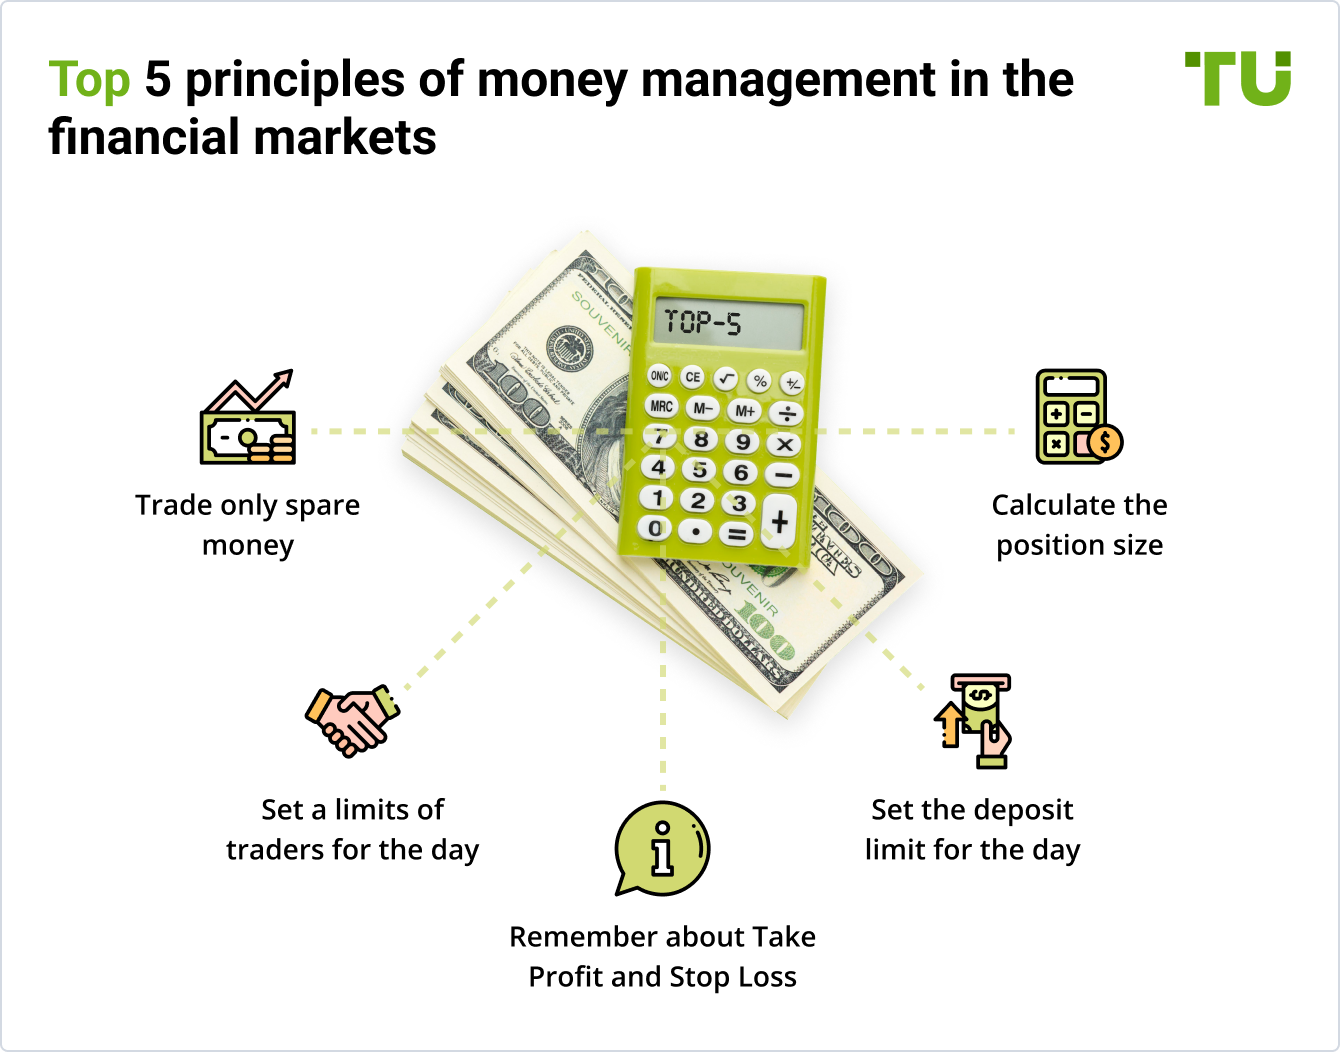 Top 5 principles of money management in the financial markets